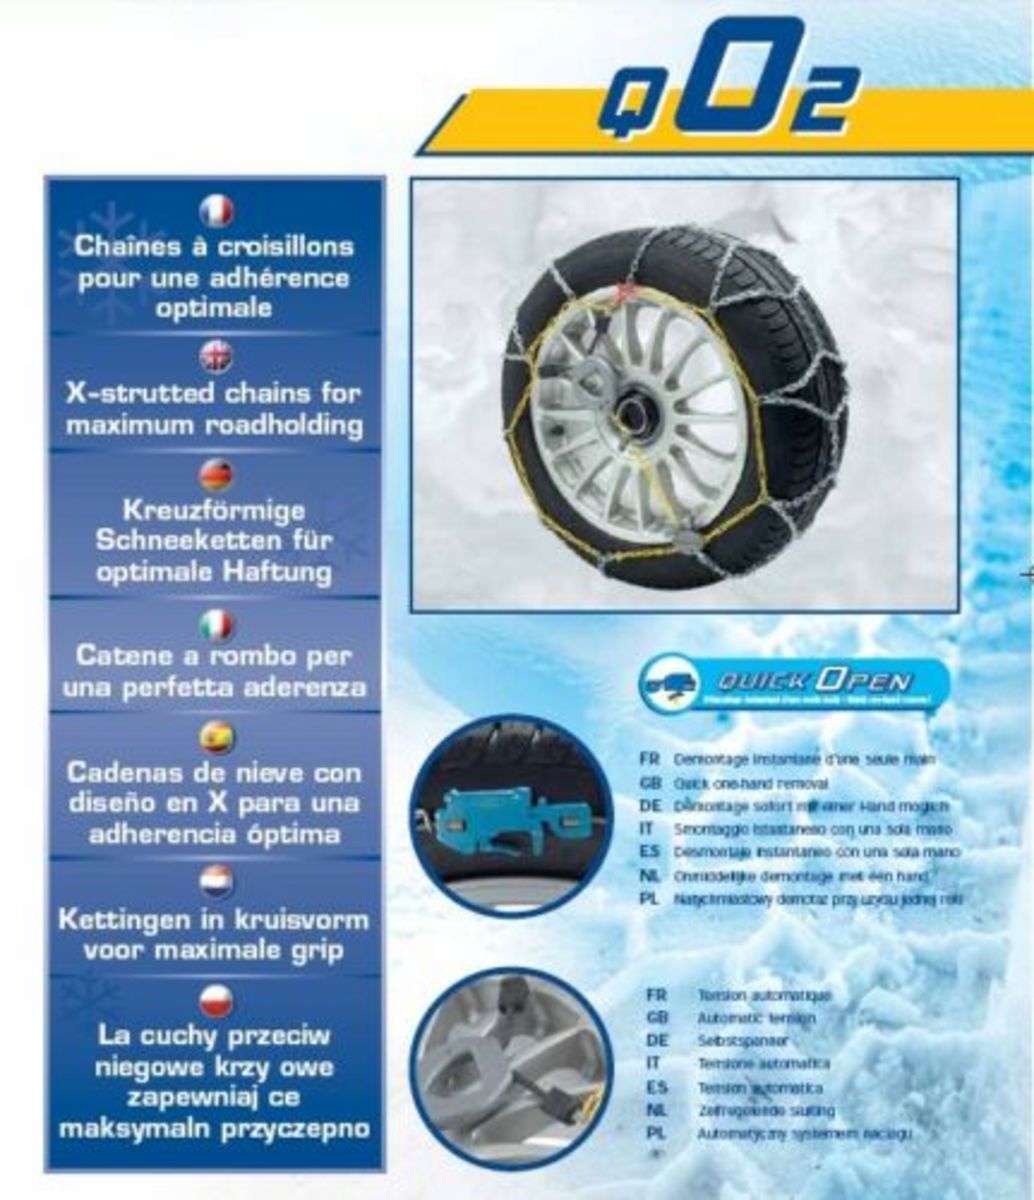 chaines-neige-14-500-6